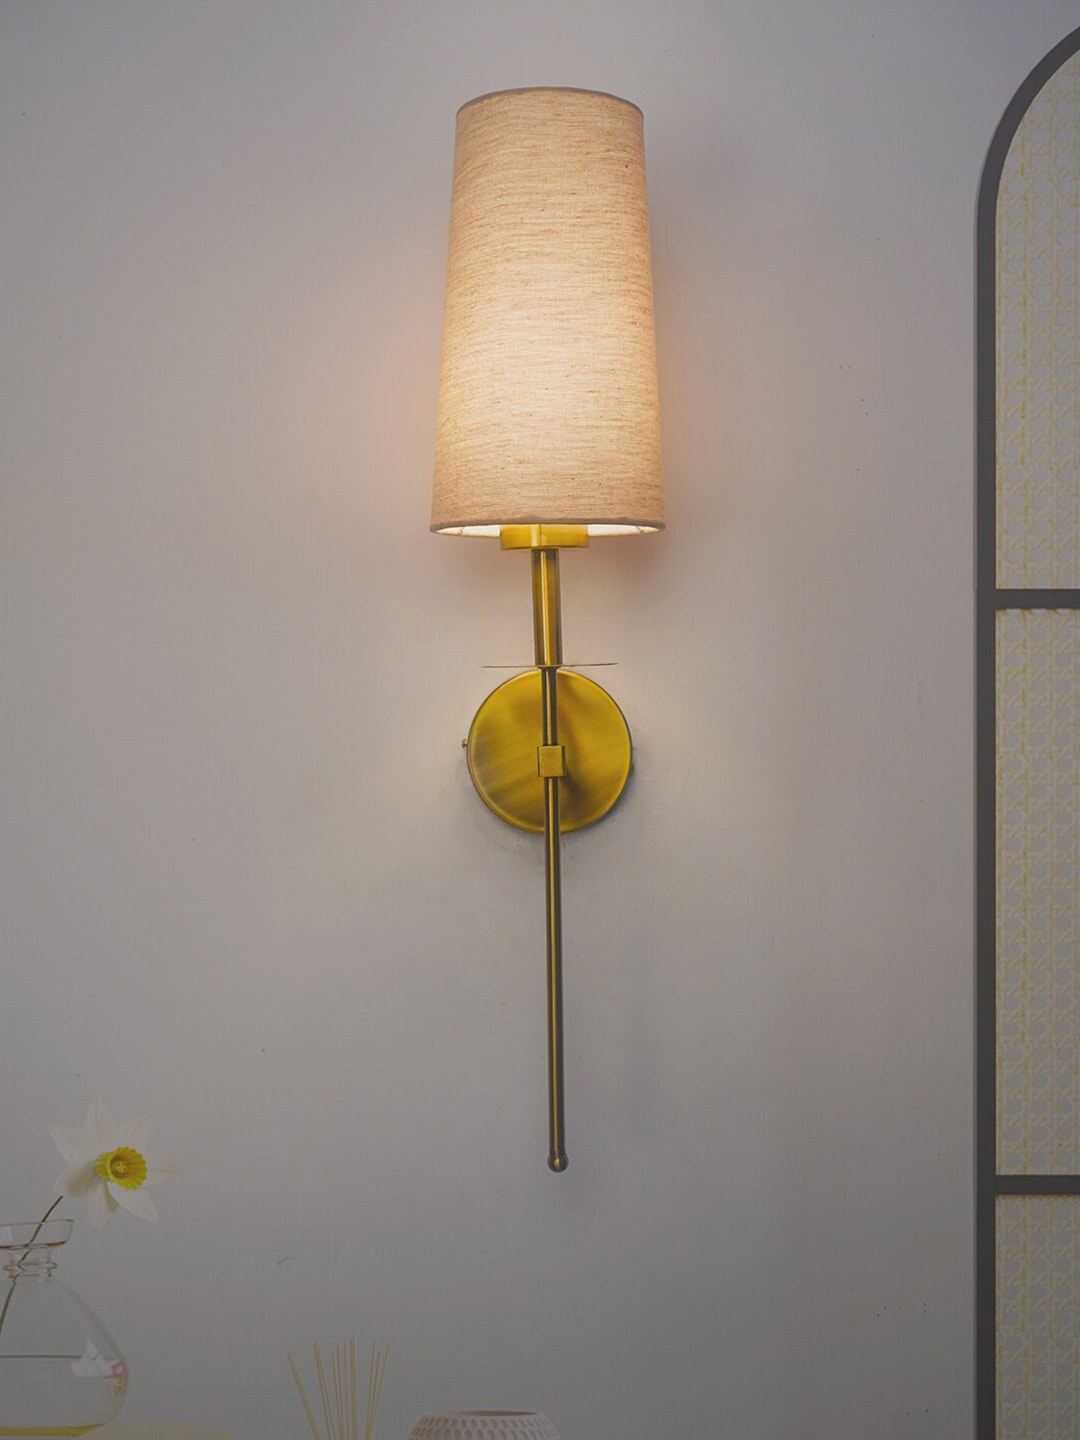 Fos Lighting Gold-Toned & Cream-Coloured Glass Classic Country Wall Lamp With Shade Price in India